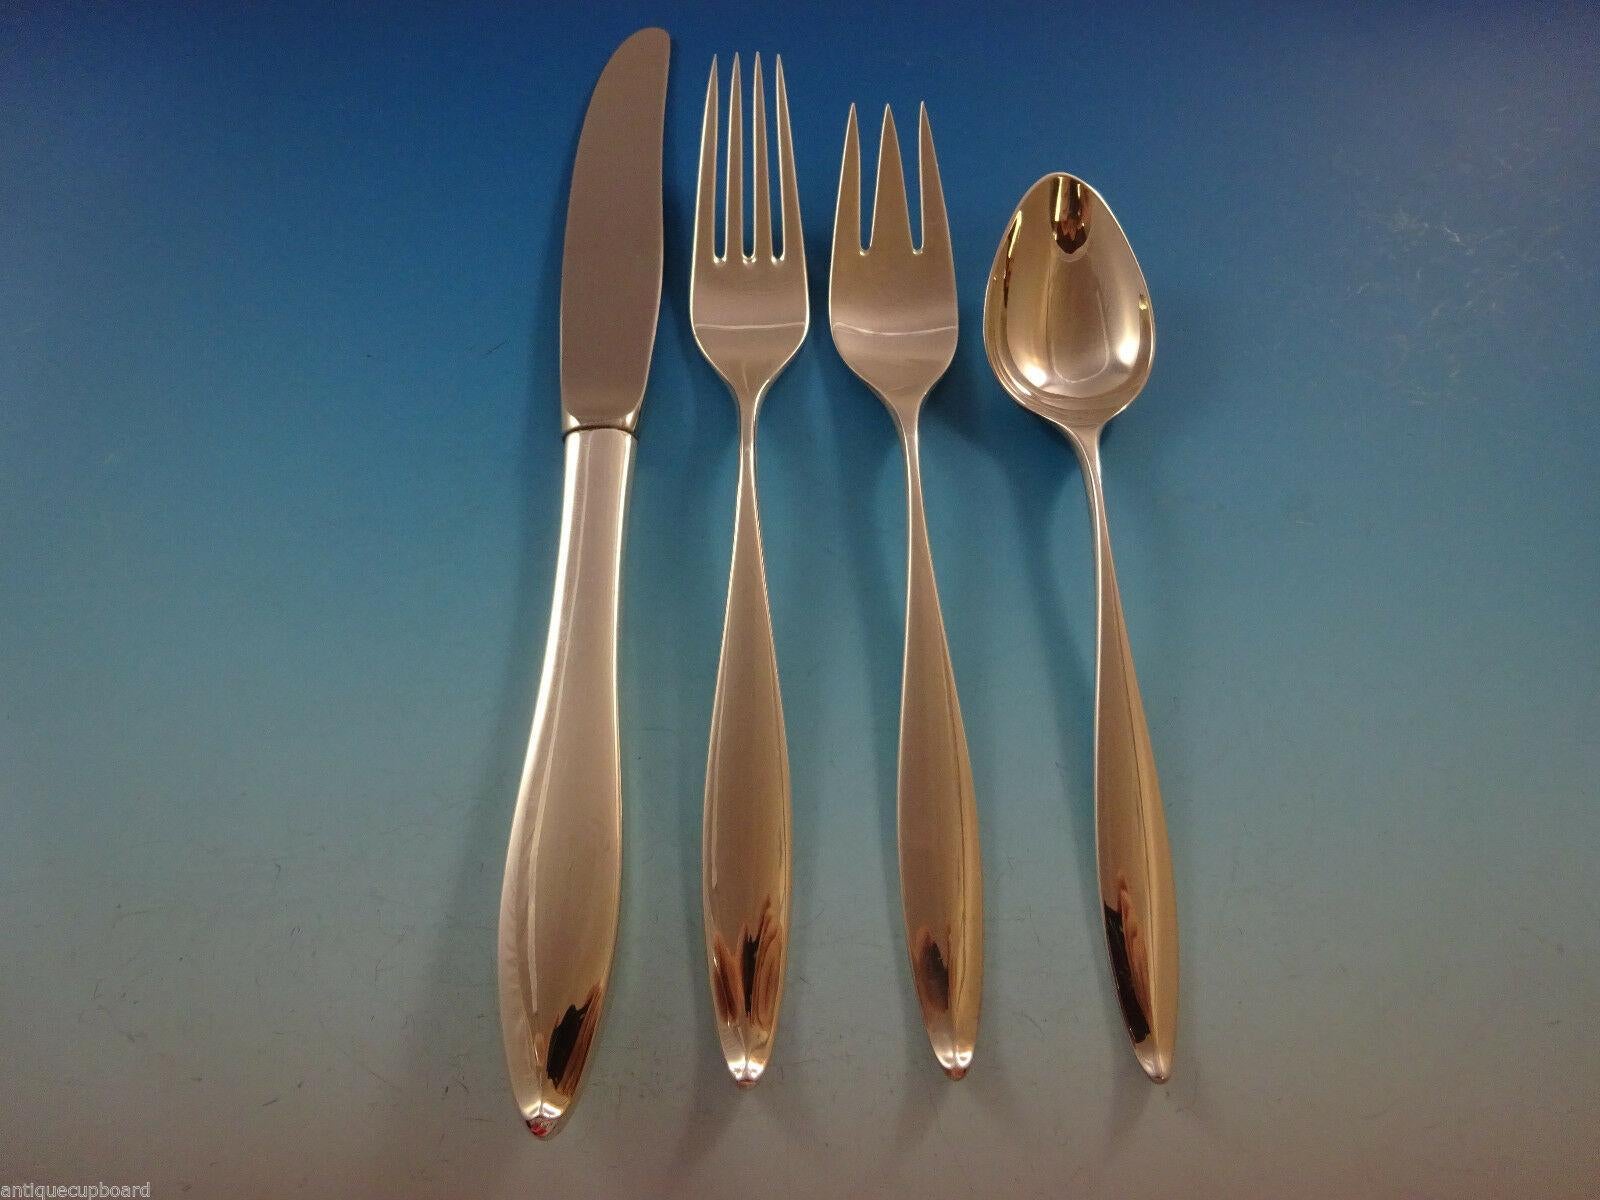 Modern, sleek, and unadorned Vespera by Towle sterling silver flatware set - 53 pieces. This set includes:

8 knives, 9